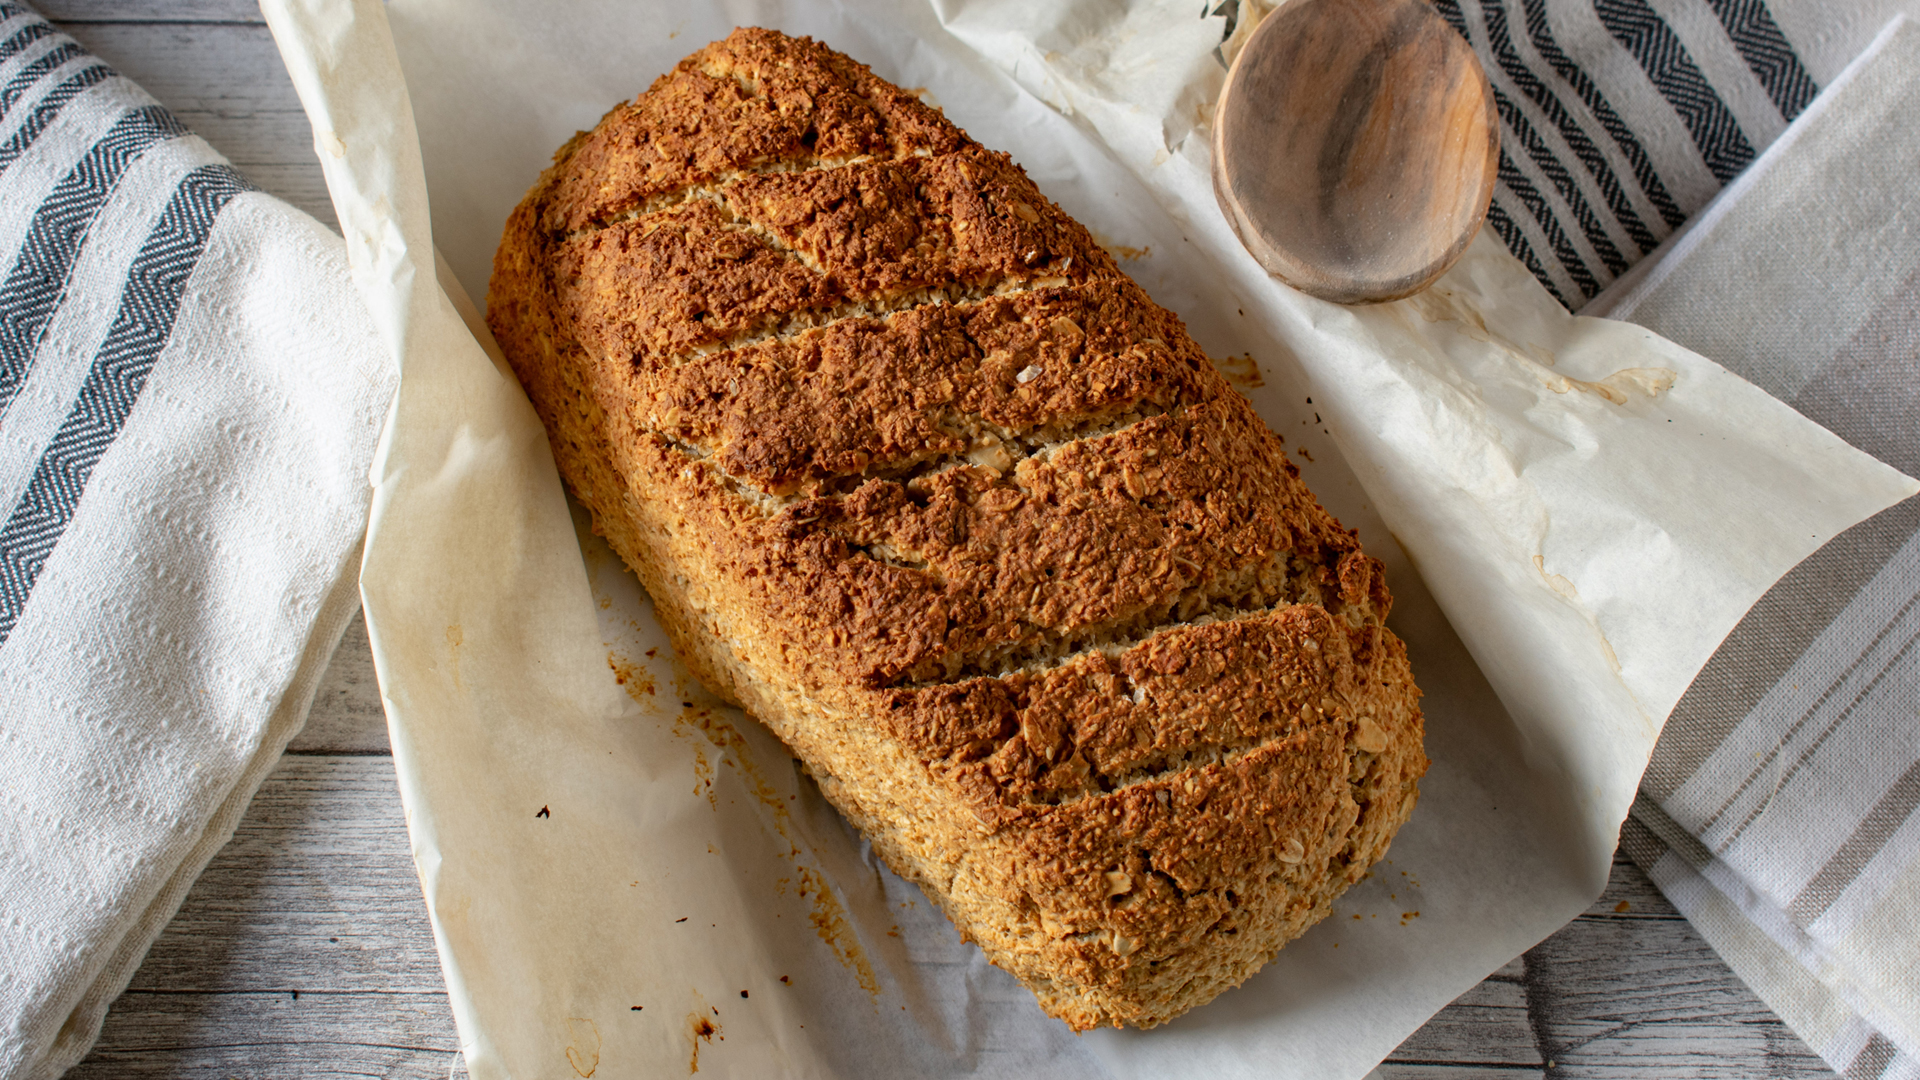 Bake your own gluten-free bread for your morning toast